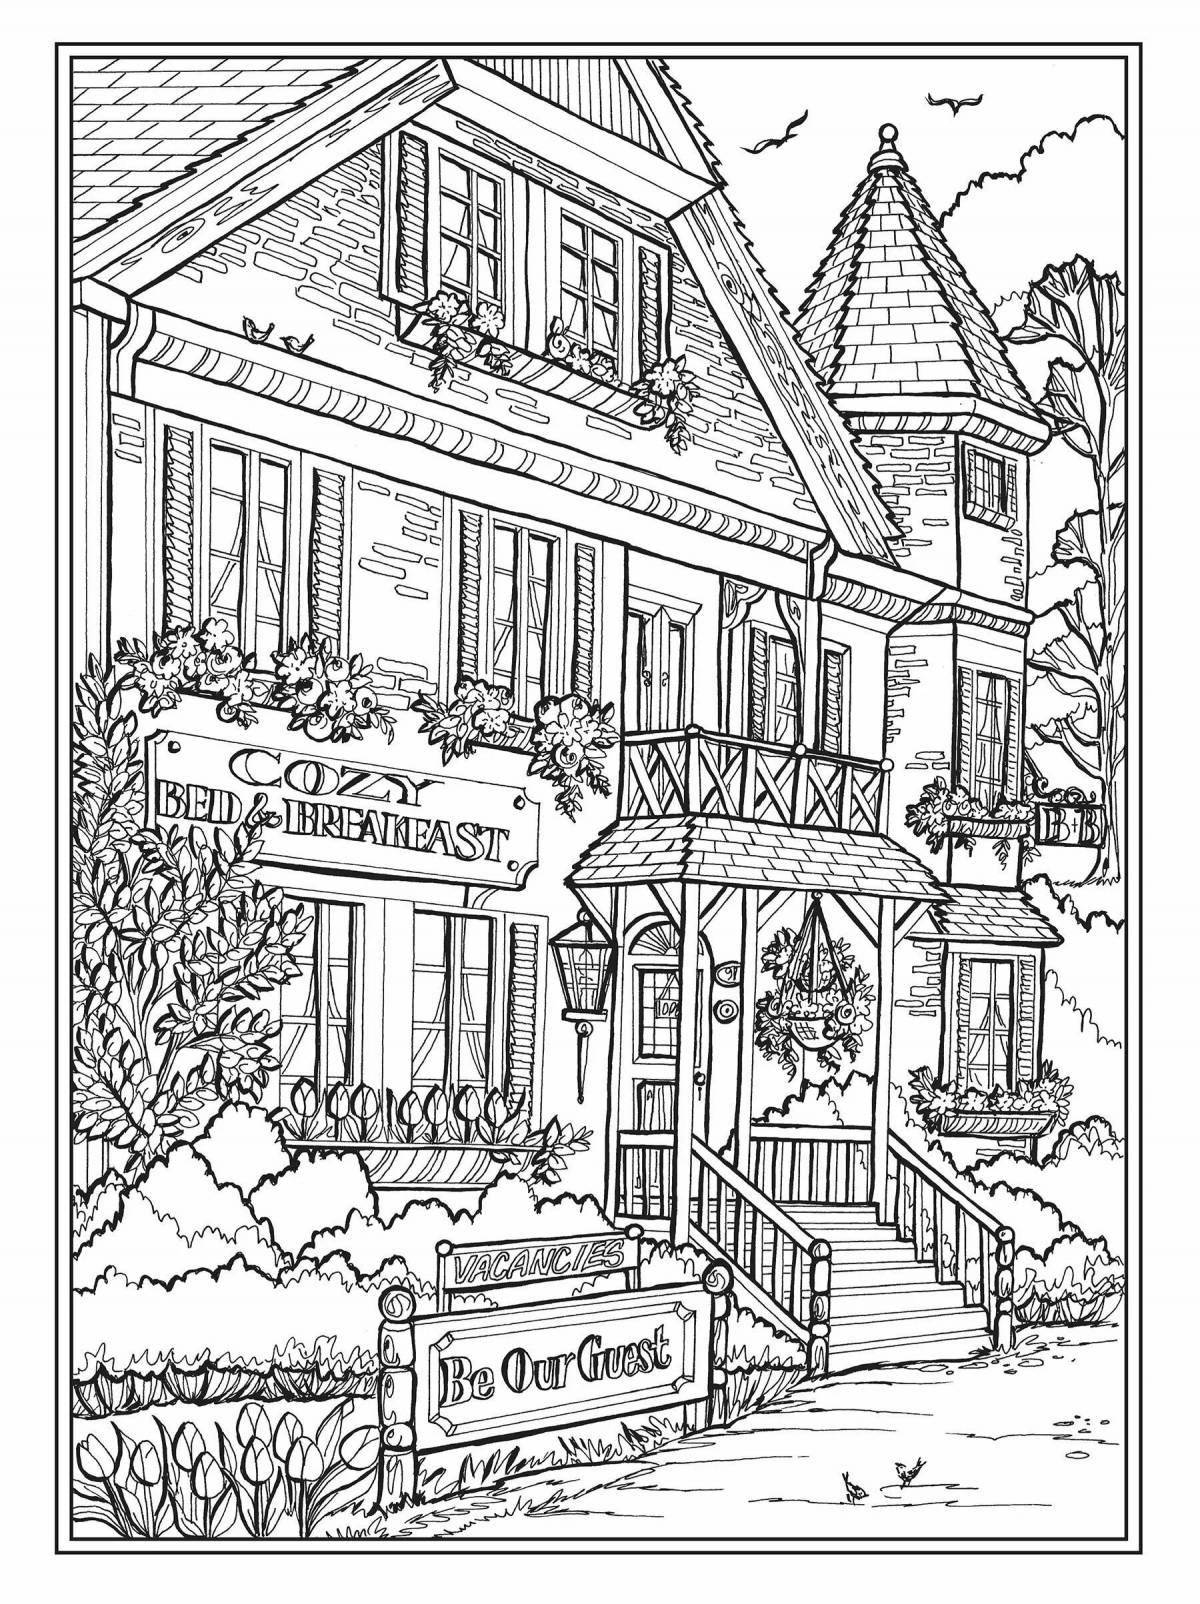 Creative haven coloring page - live